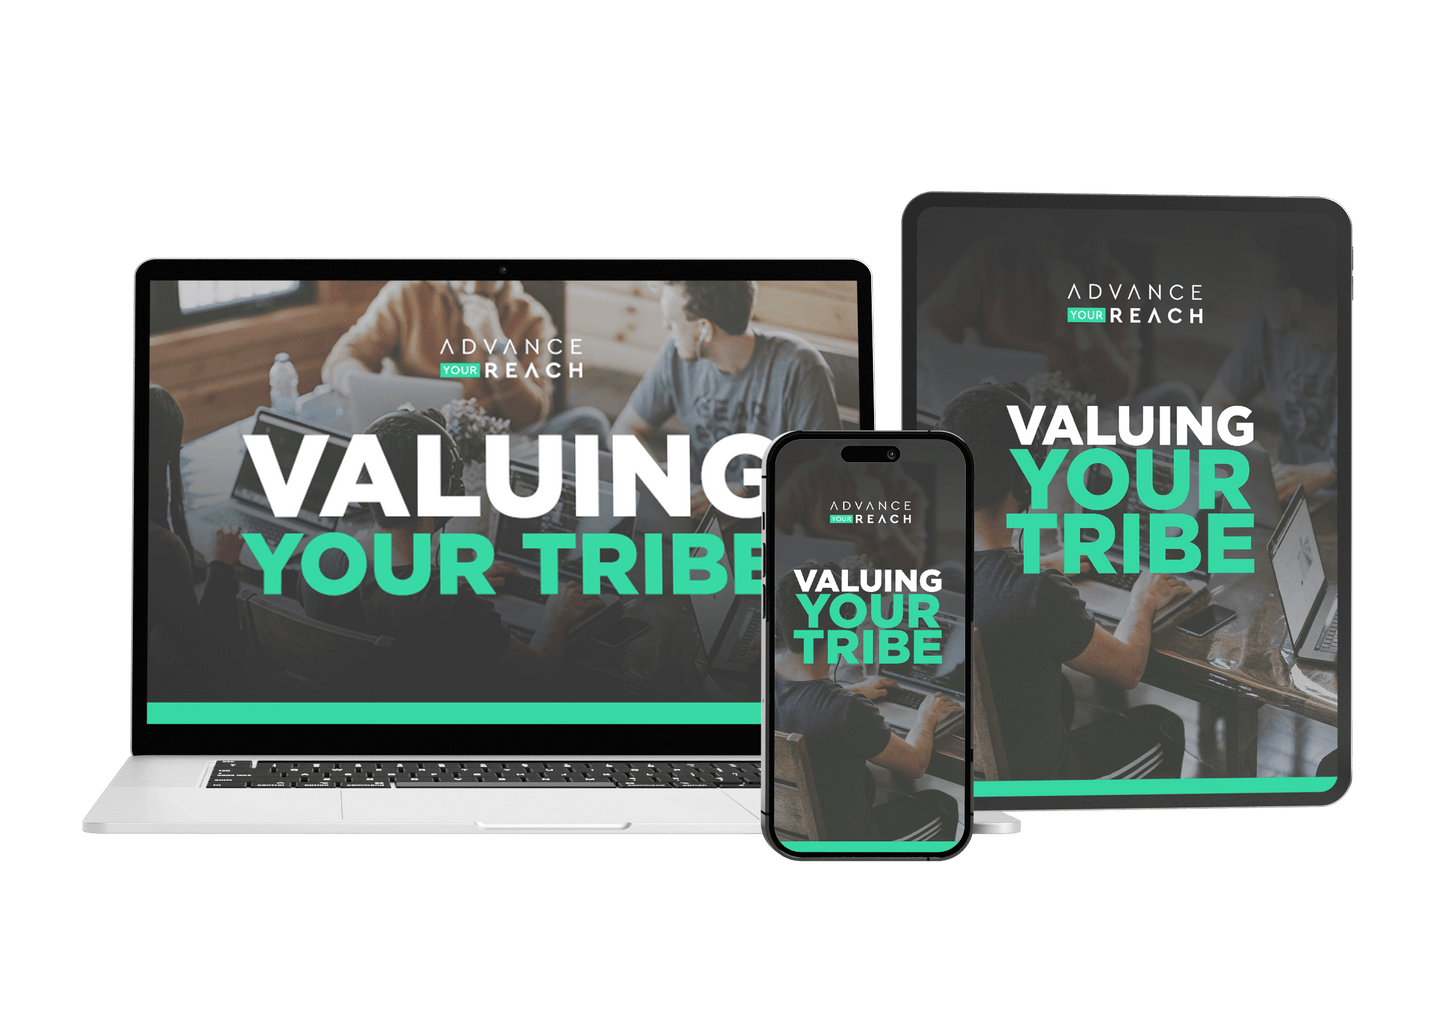 Valuing Your Tribe